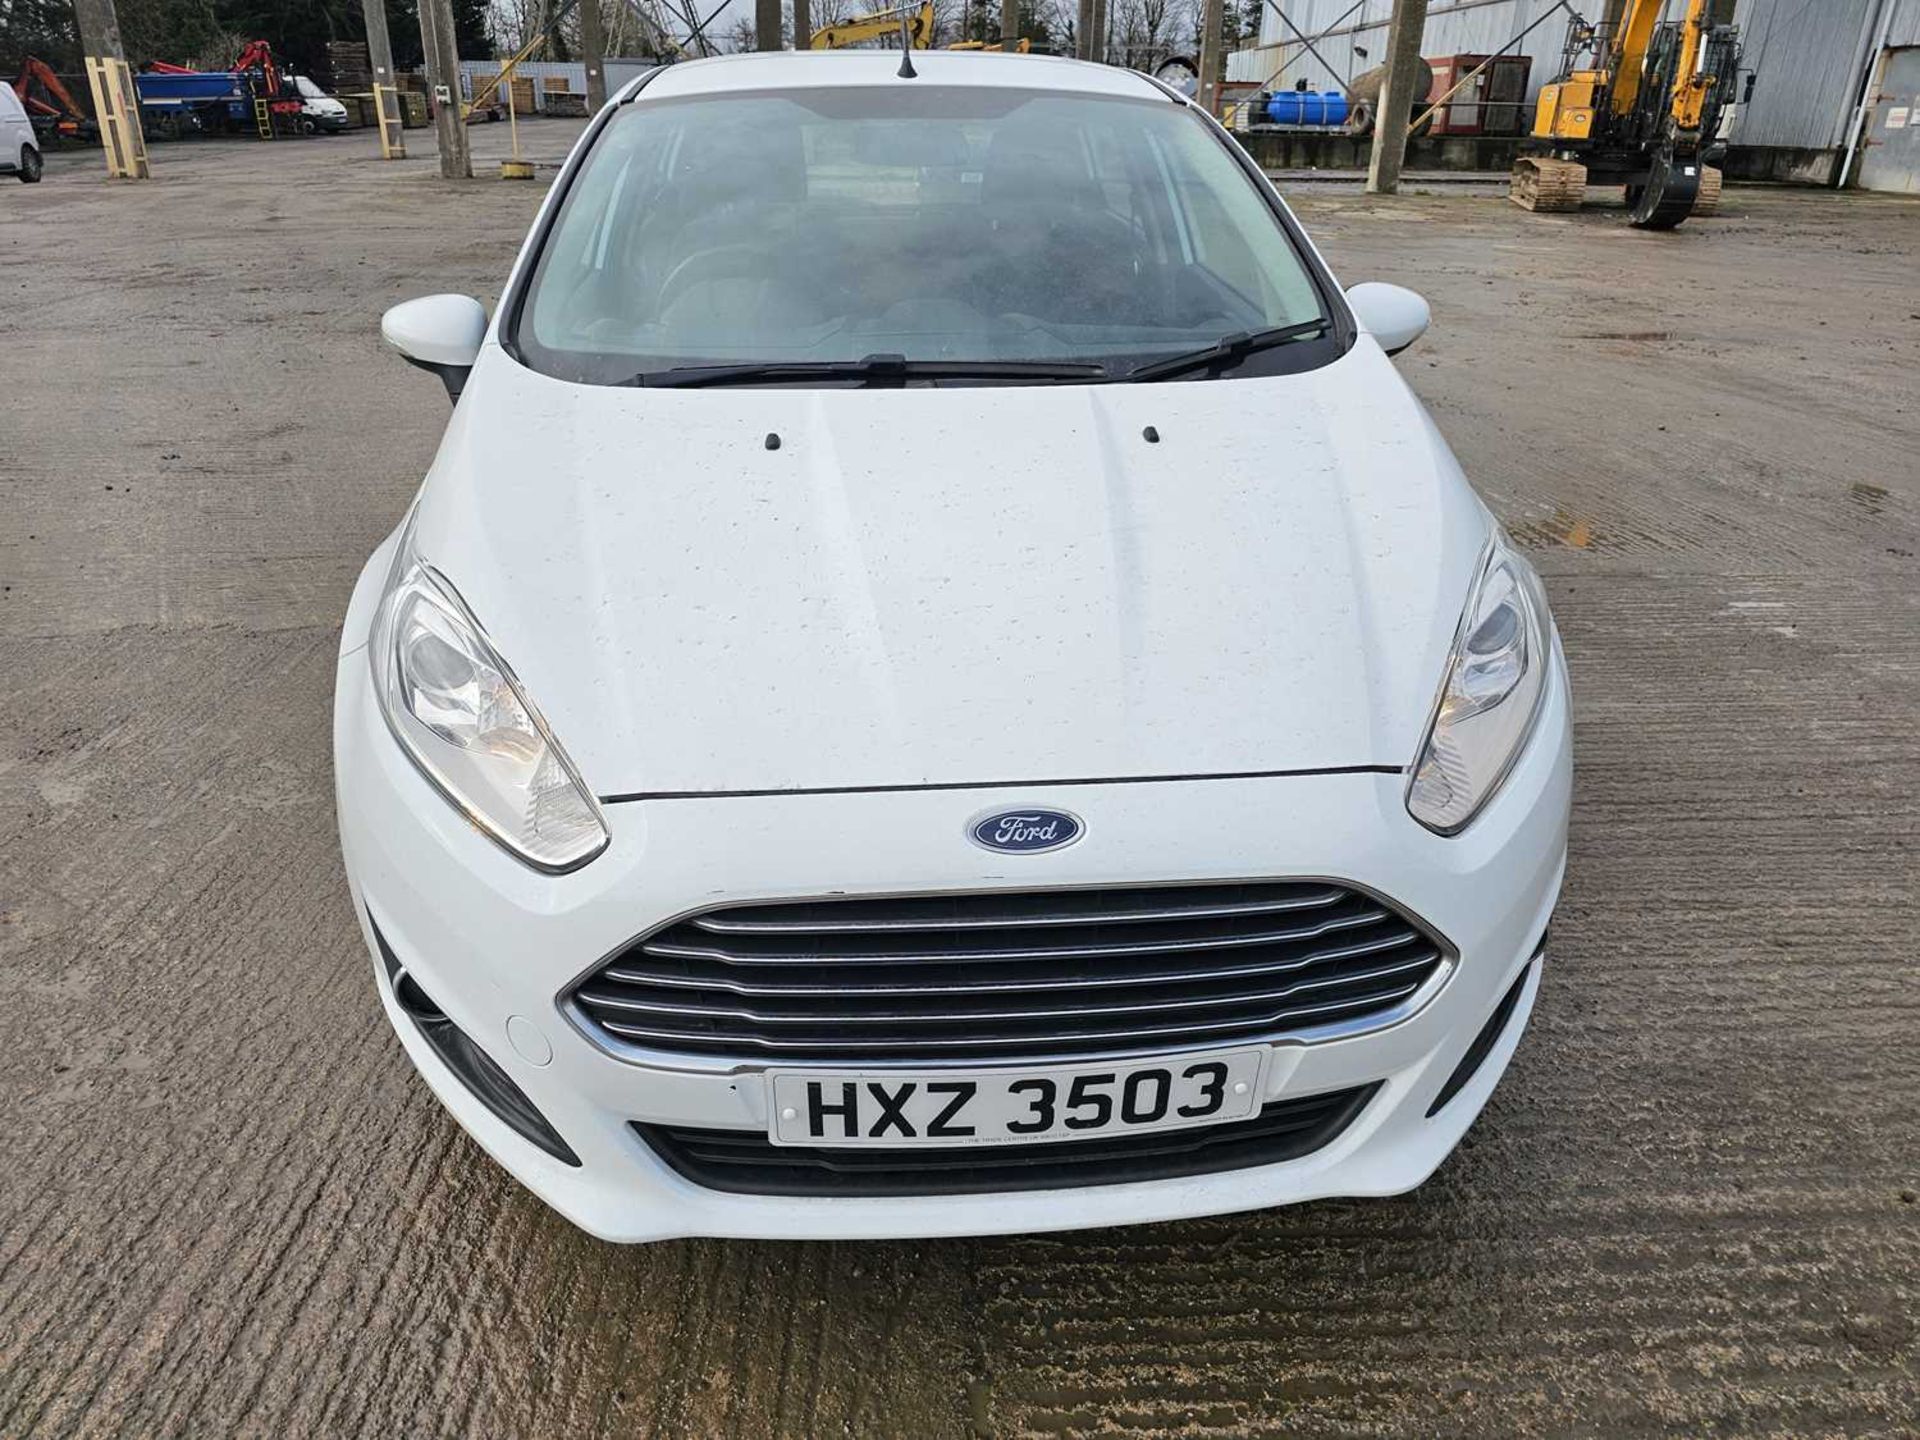 2015 Ford Fiesta, 5 Speed, Bluetooth, A/C (Reg. Docs. & Service History Available, Tested 01/25) - Bild 5 aus 28